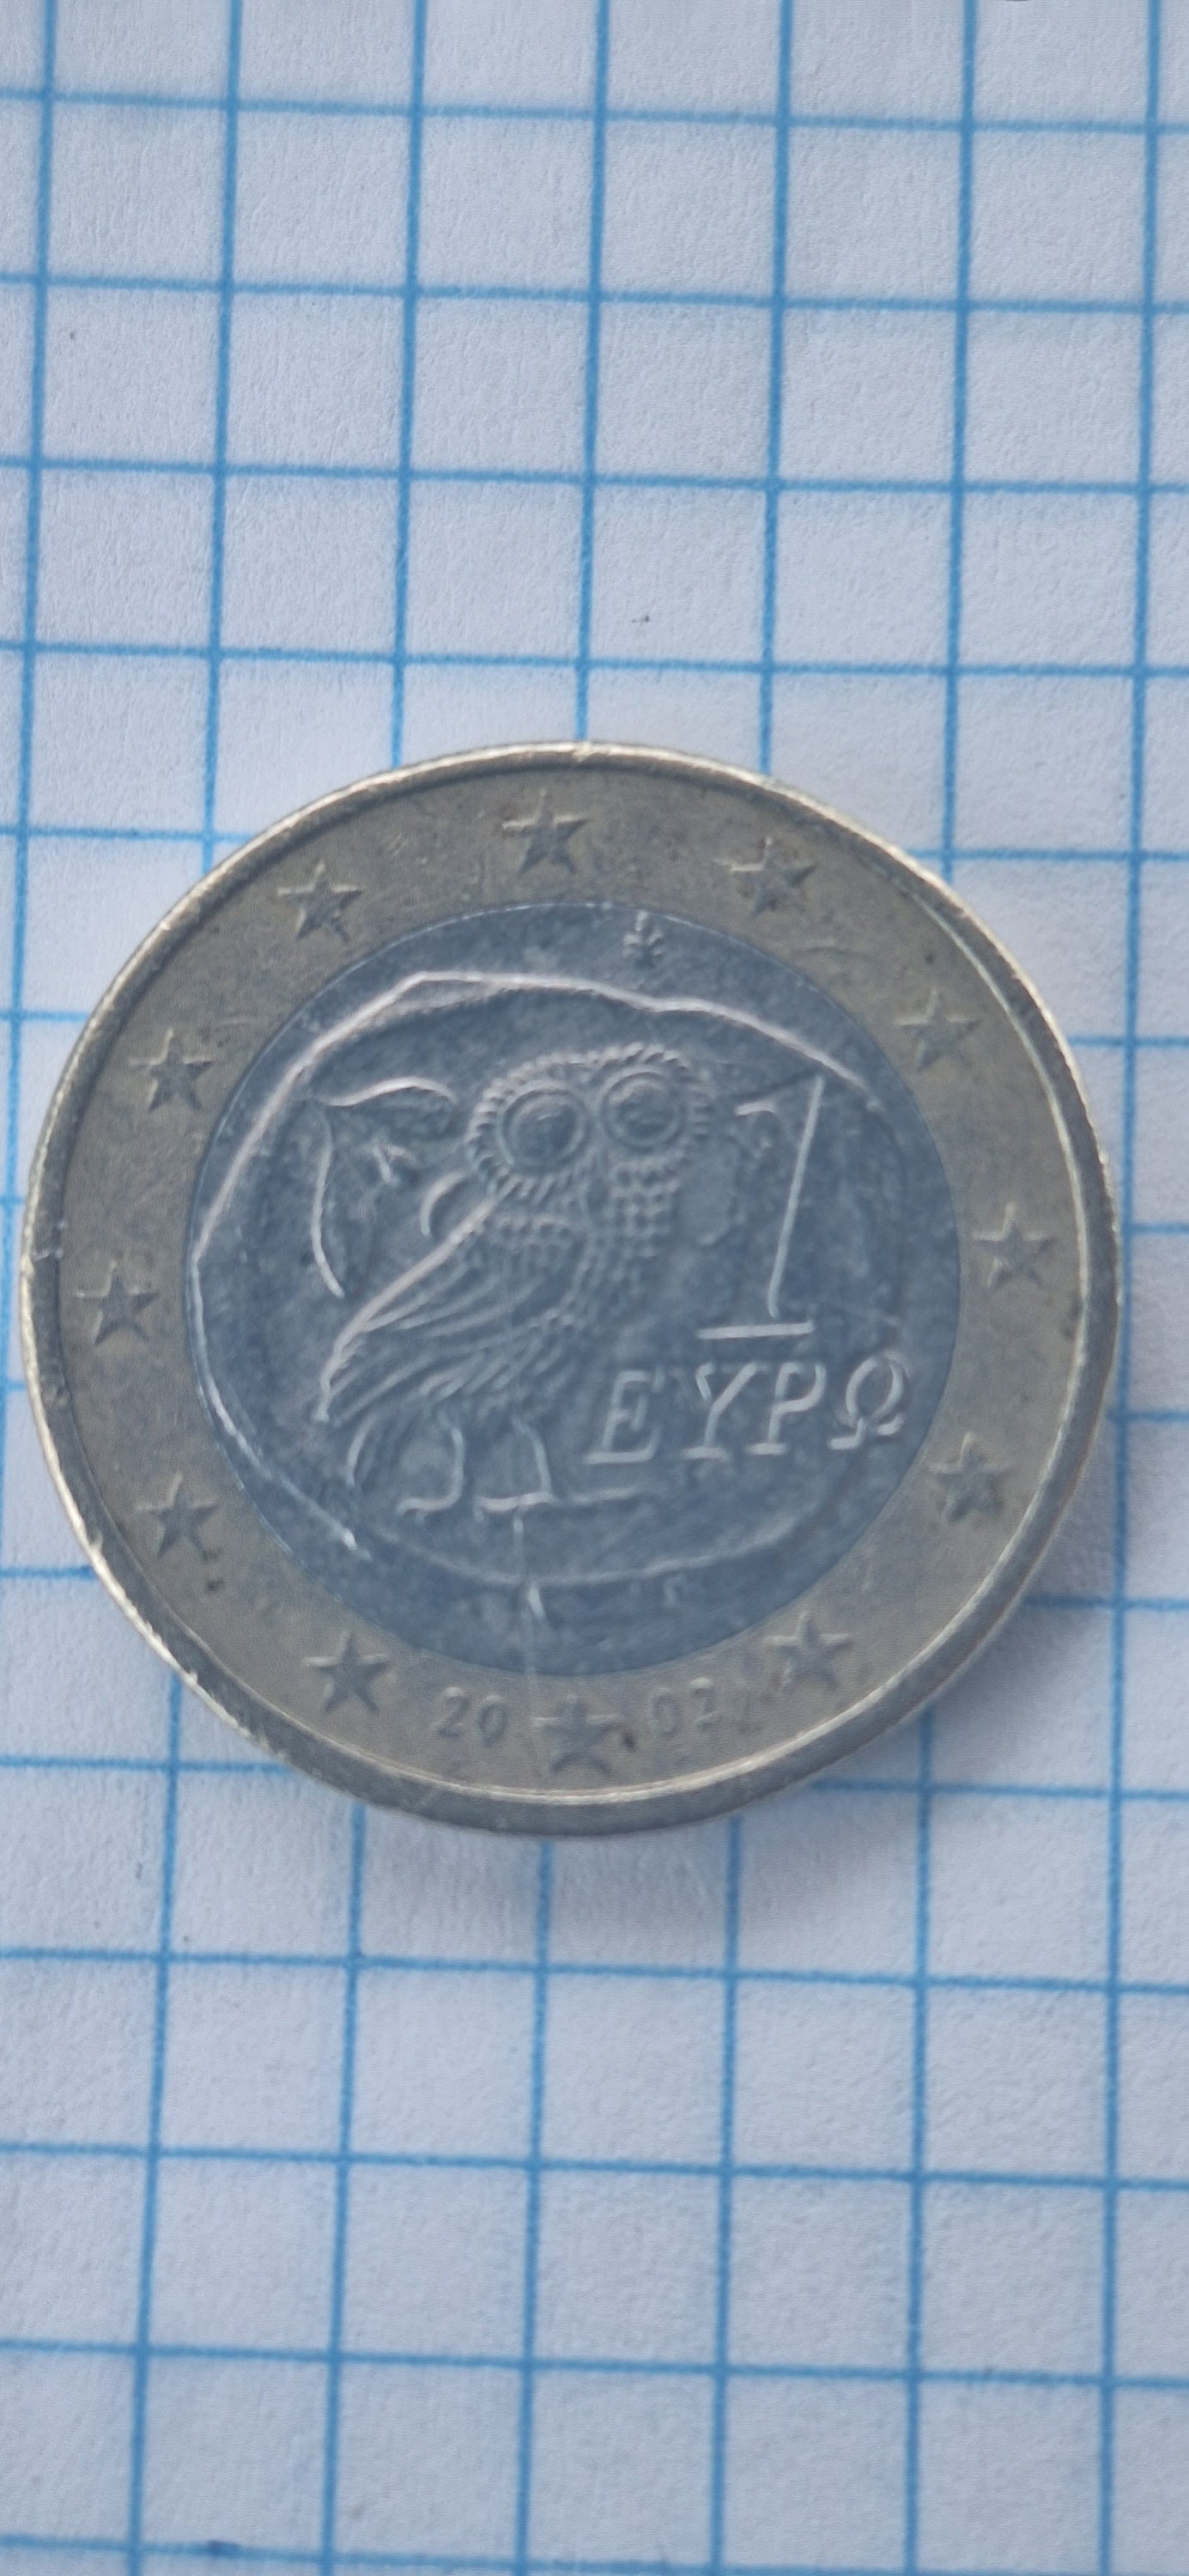 Currency 1 Euro Owl Greece 2010. Huge typo in the right eye of the owl  appears a 1.